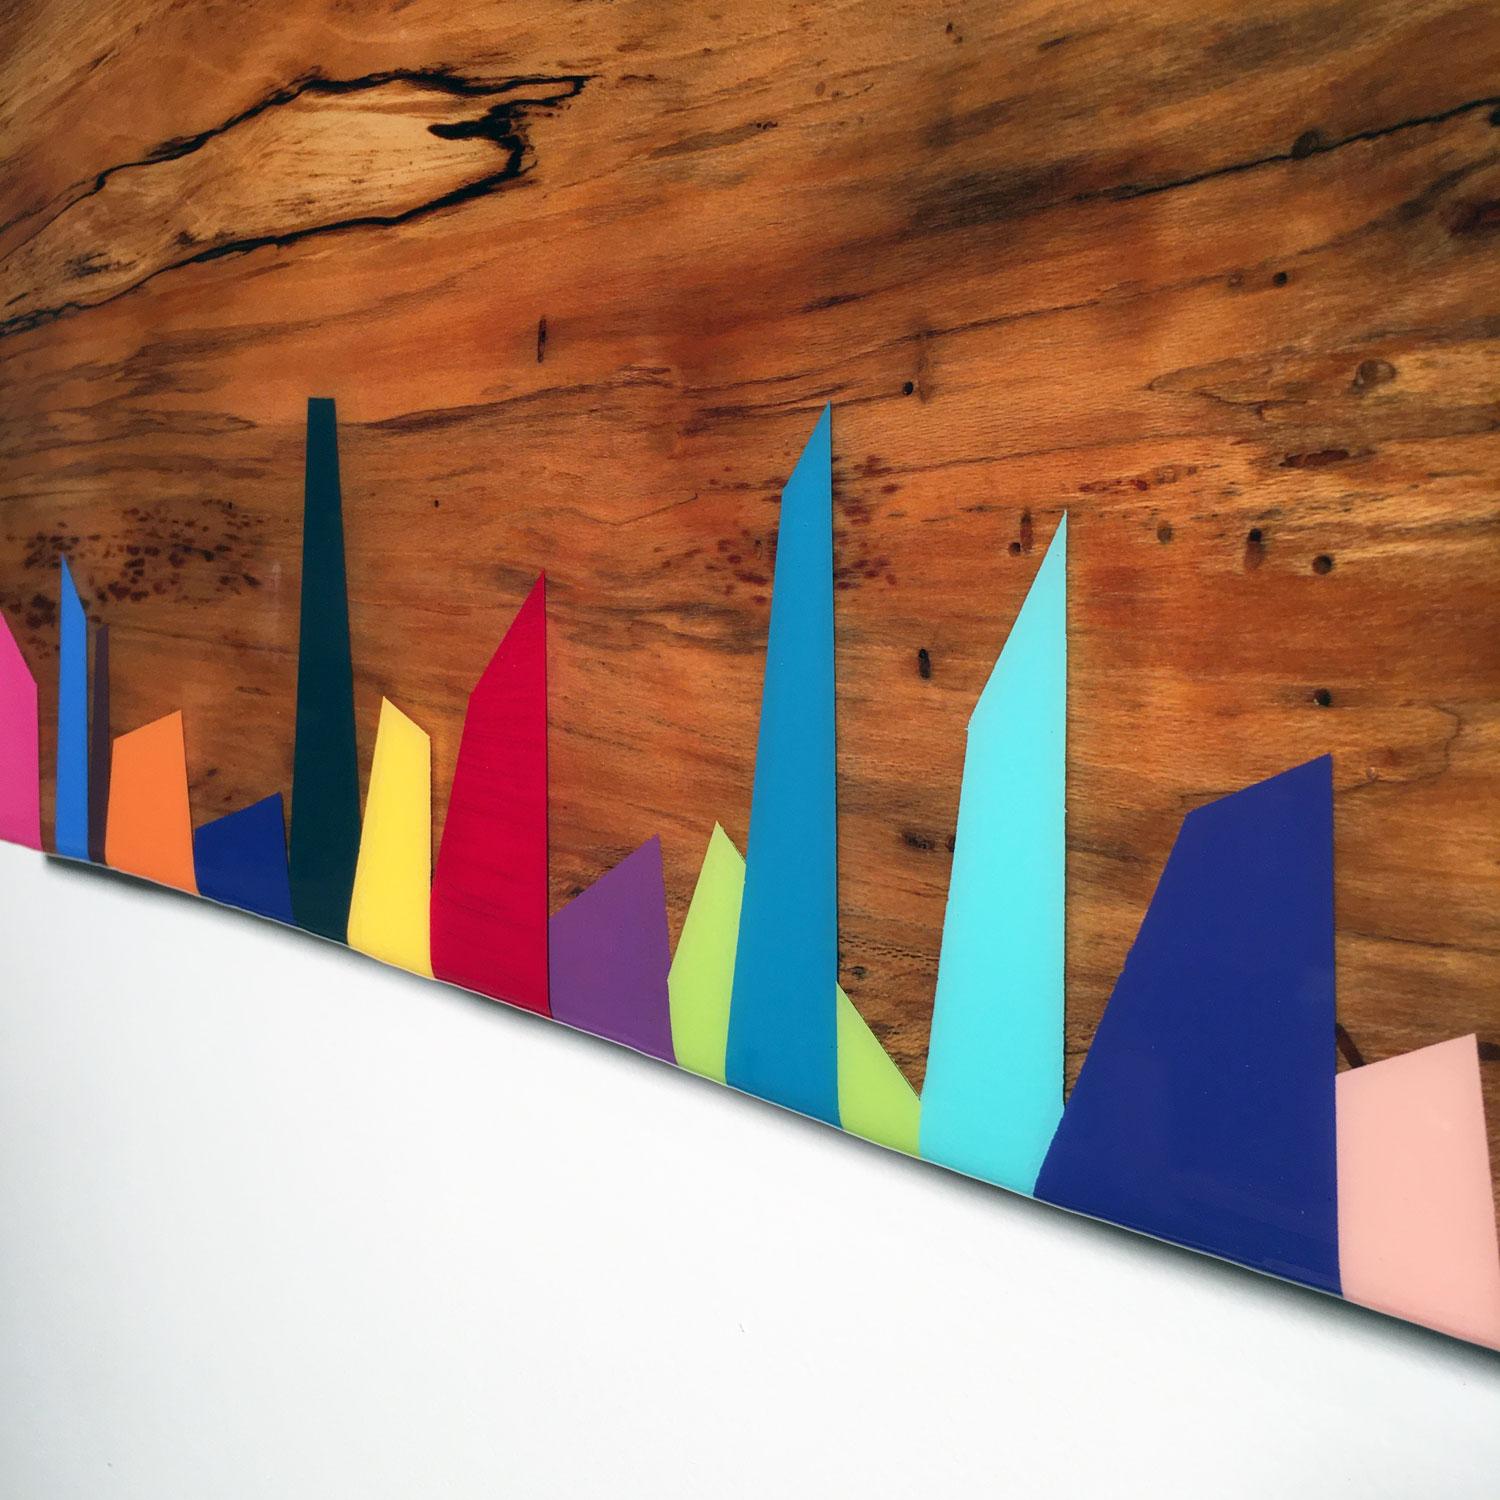 Mini Leaner #8, Contemporary Painted Rainbow Wall Sculpture, Shiny Exotic Wood 4